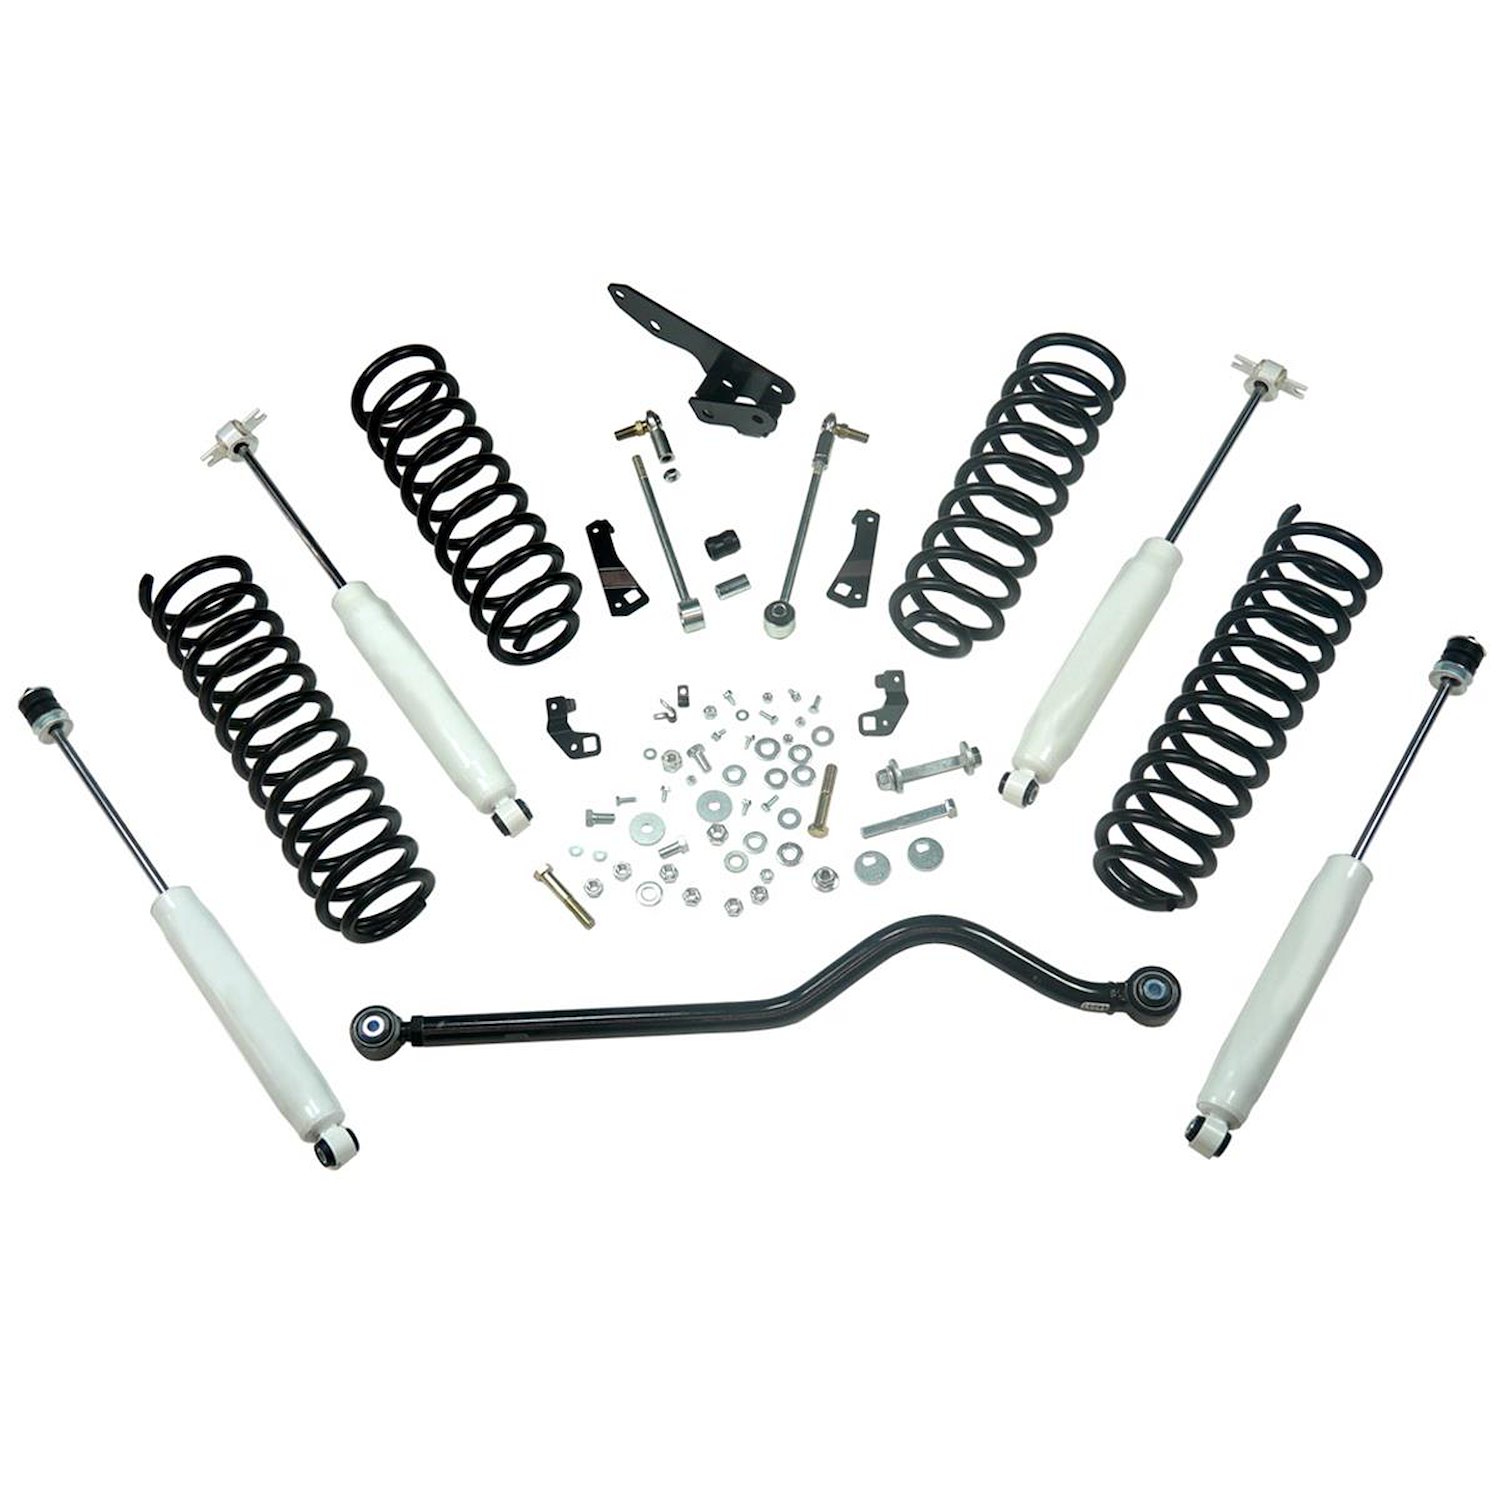 61404 Front and Rear Suspension Lift Kit, Lift Amount: 4 in. Front/4 in. Rear